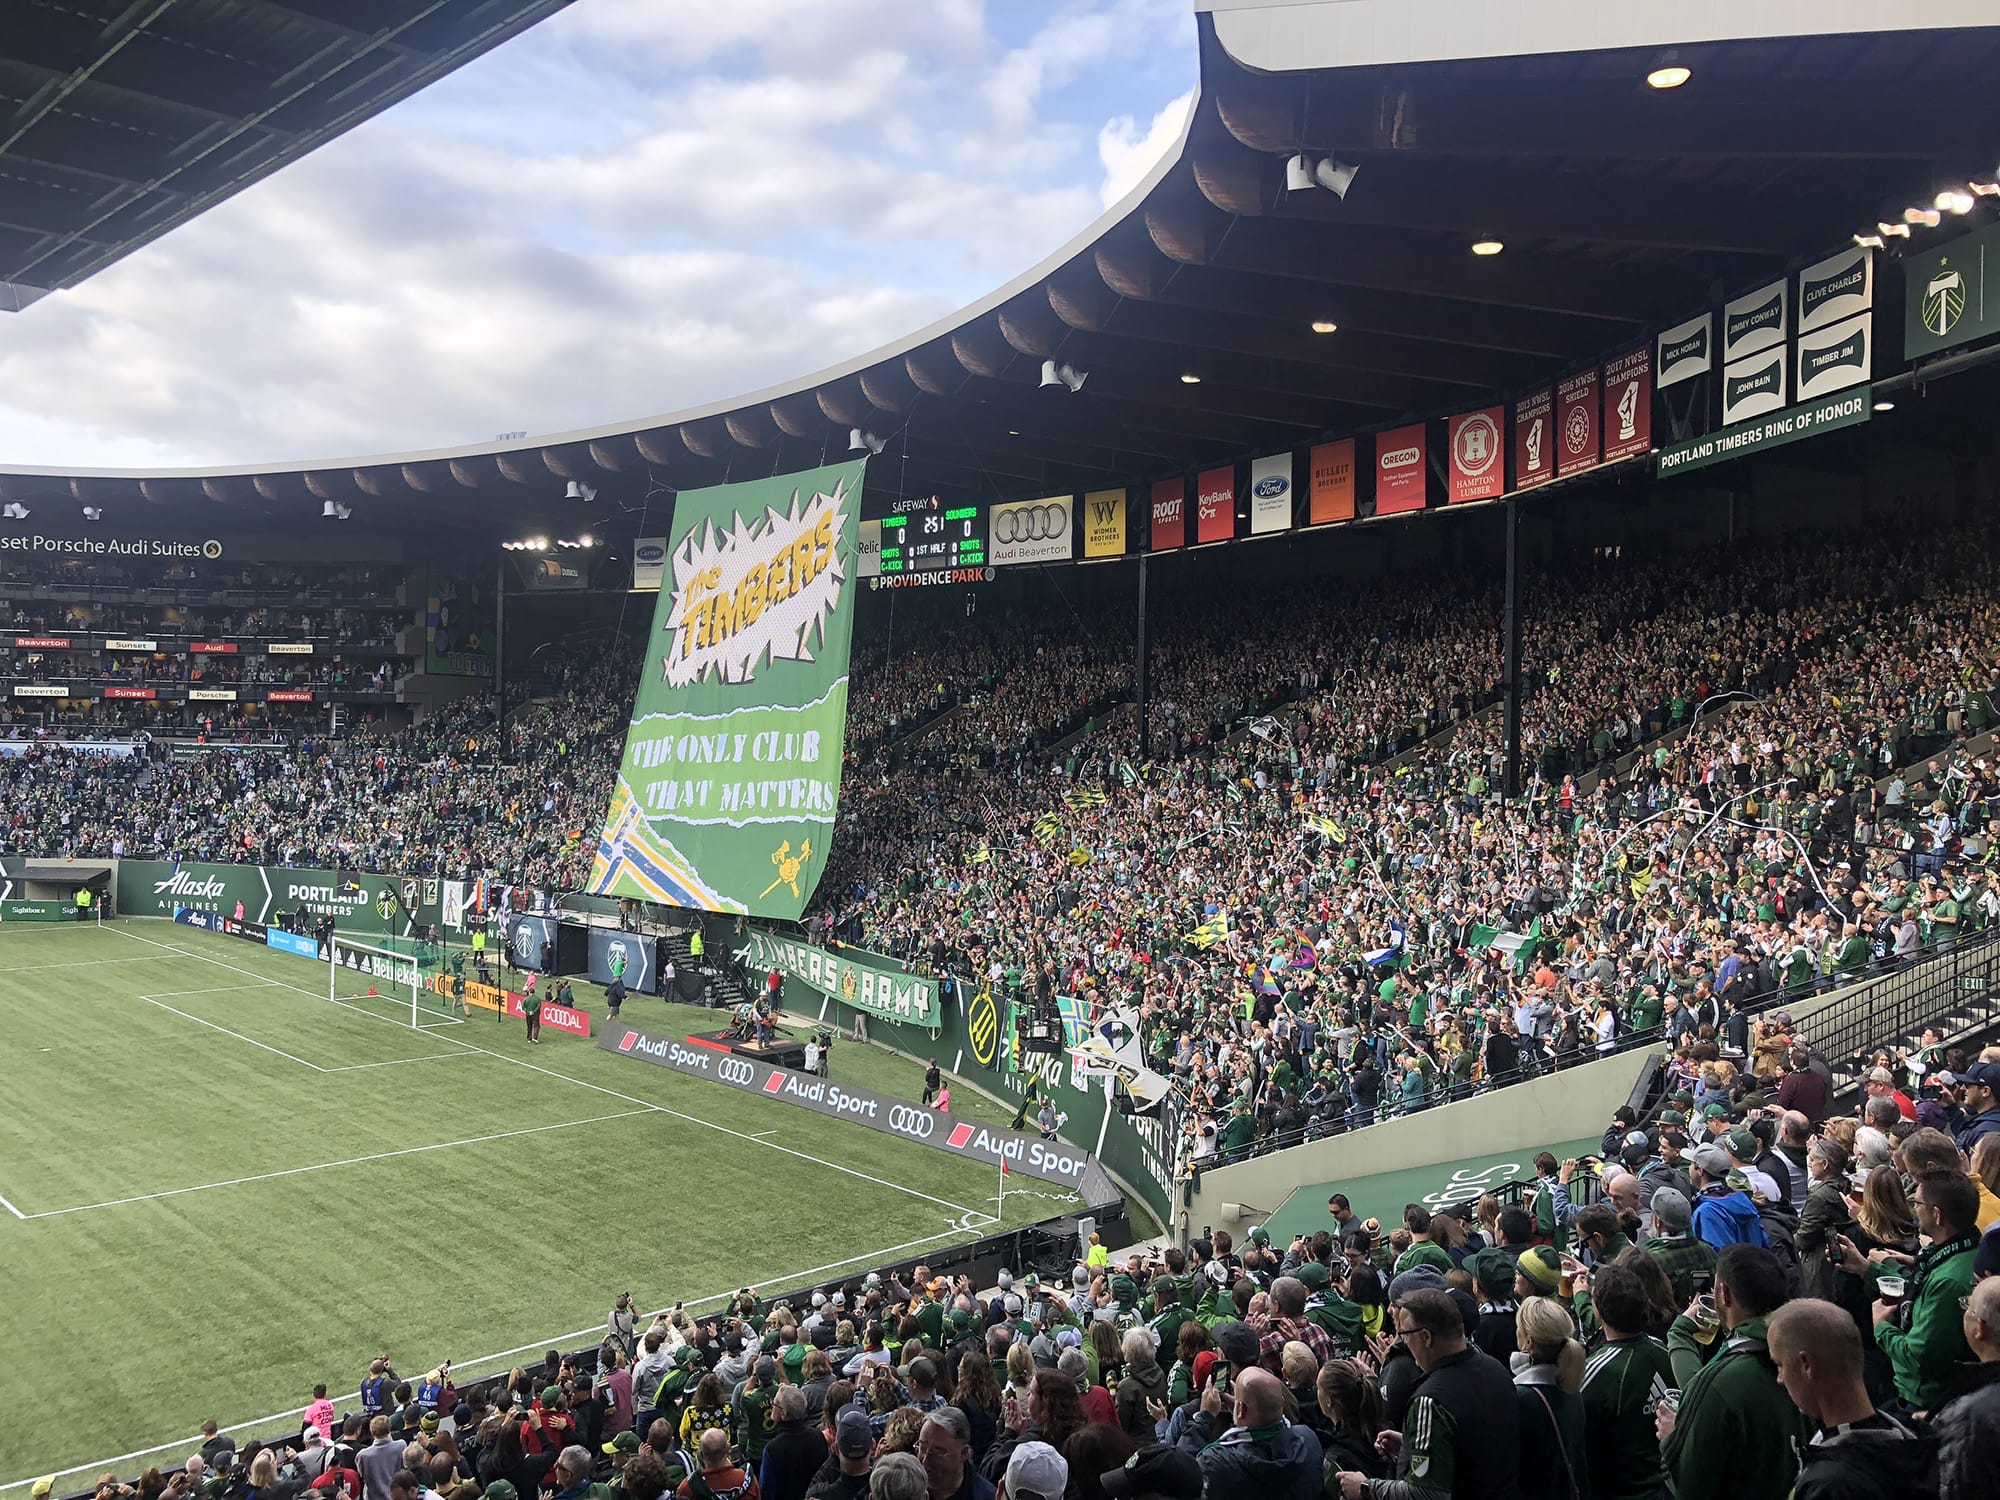 The Portland Timbers Army support group raise the tifo prior to the Timbers' playoff match against the Seattle Sounders on Sunday, Nov. 4, 2018 at Providence Park. The Timbers won the first leg 2-1.